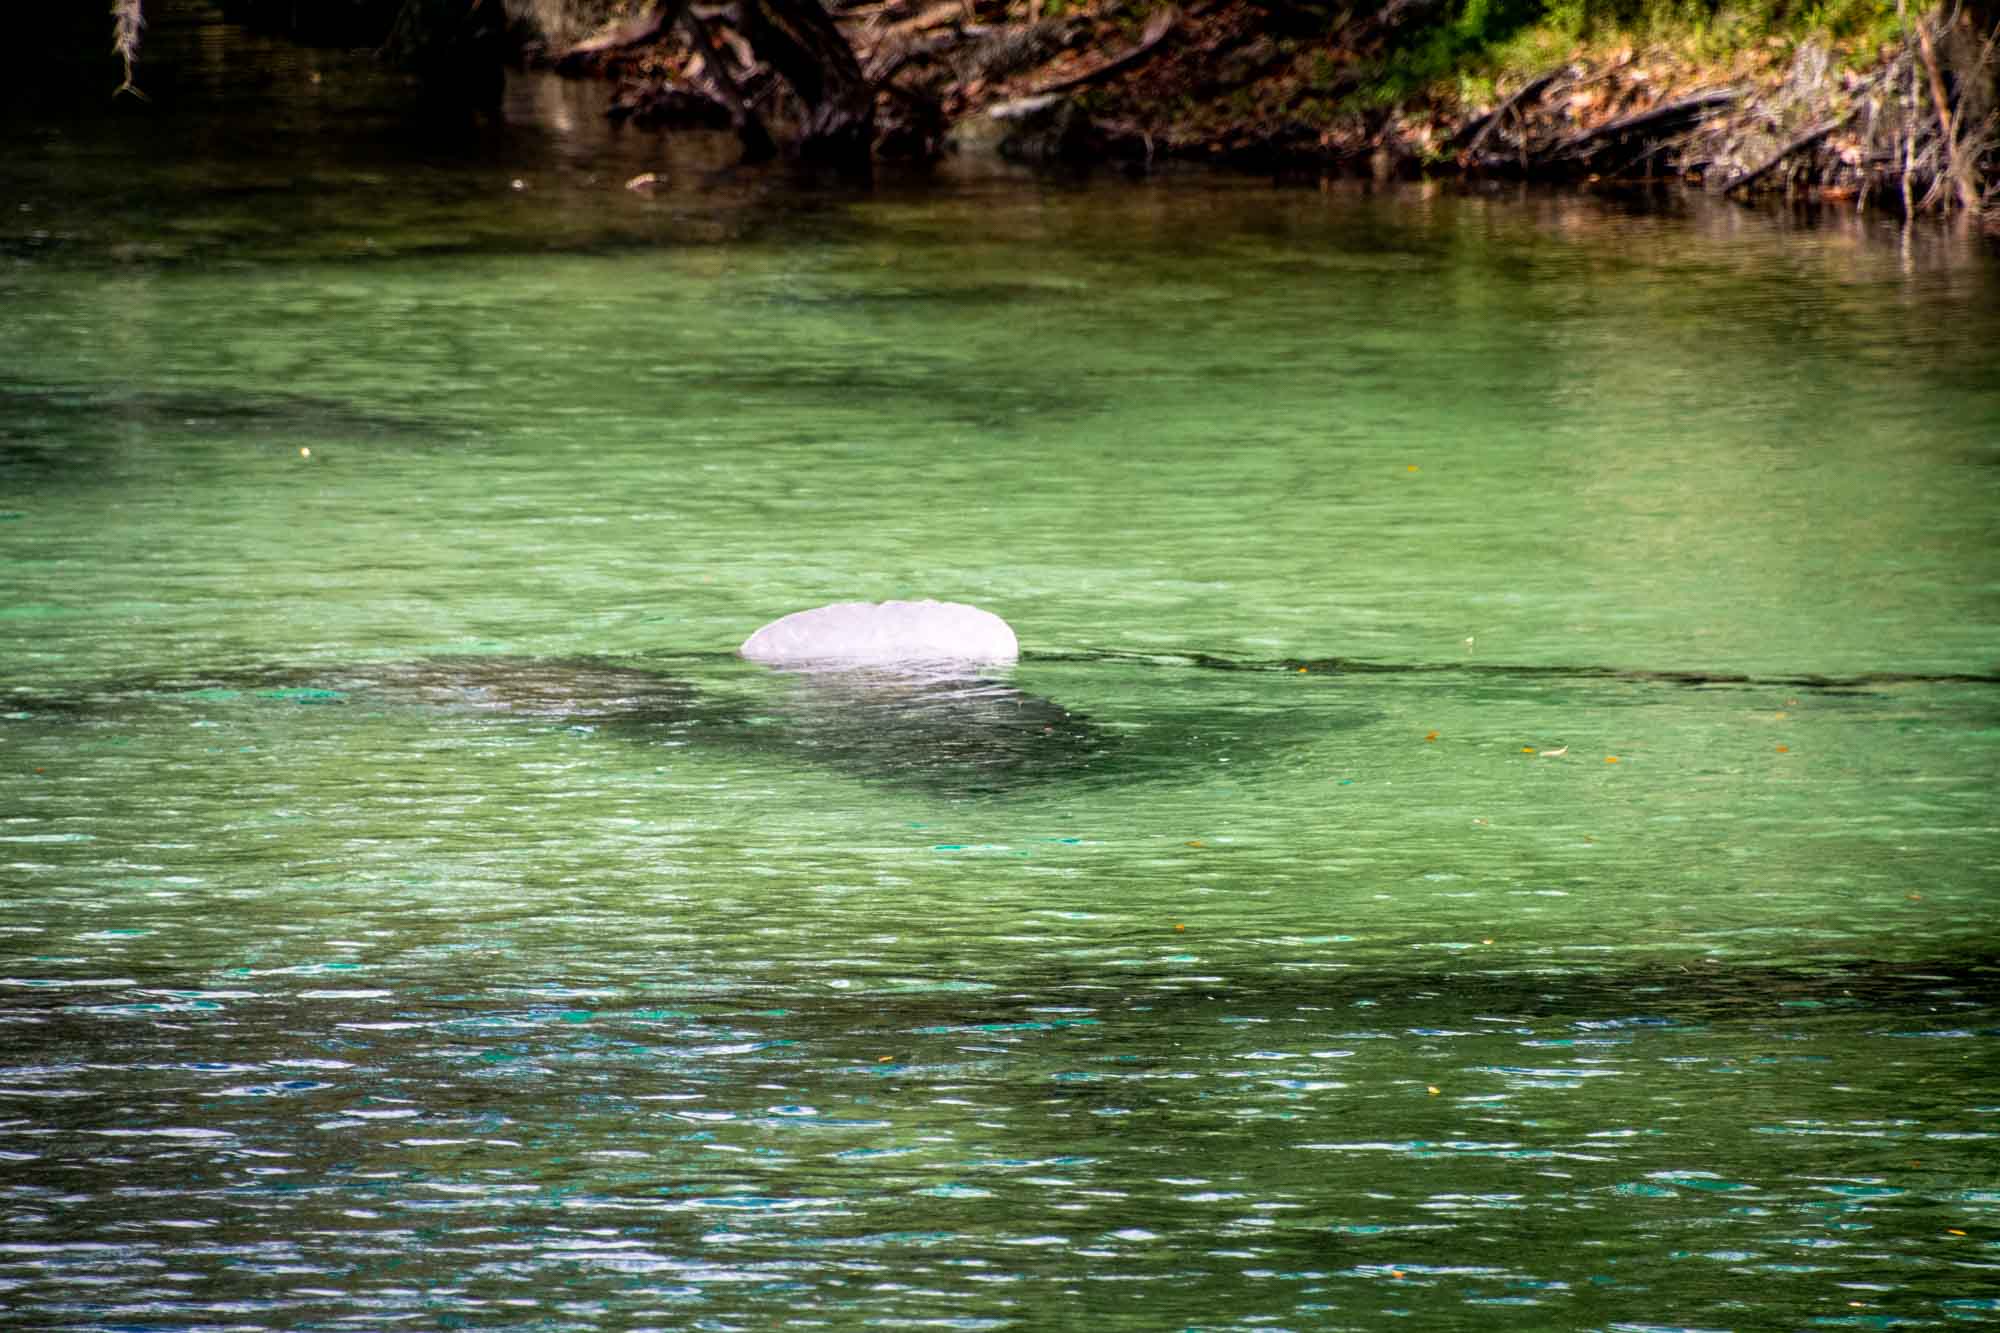 Manatee tail above the water